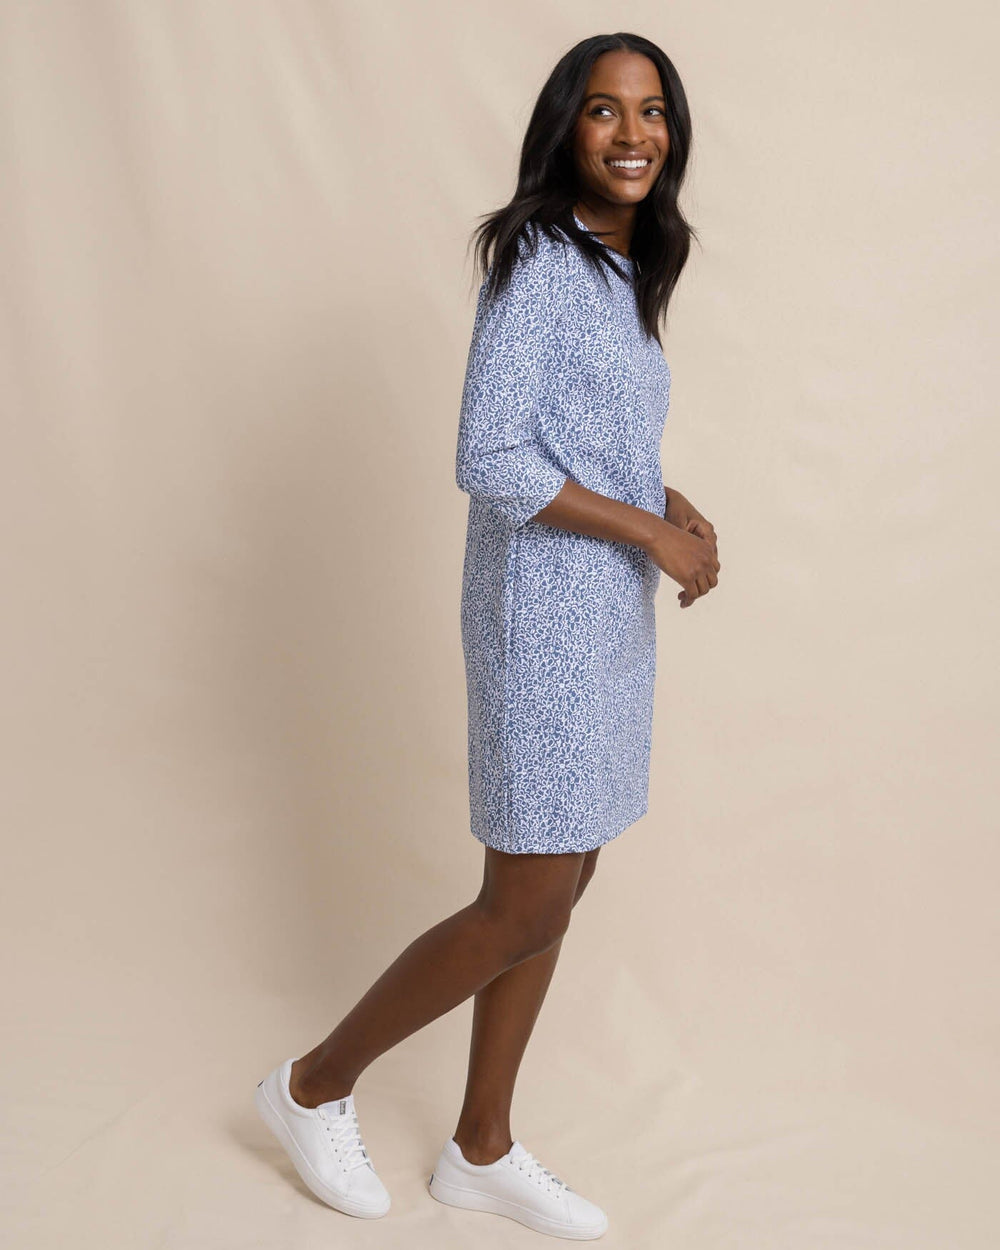 The side view of the Southern Tide Leira That Floral Feeling Print Performance Dress by Southern Tide - Coronet Blue